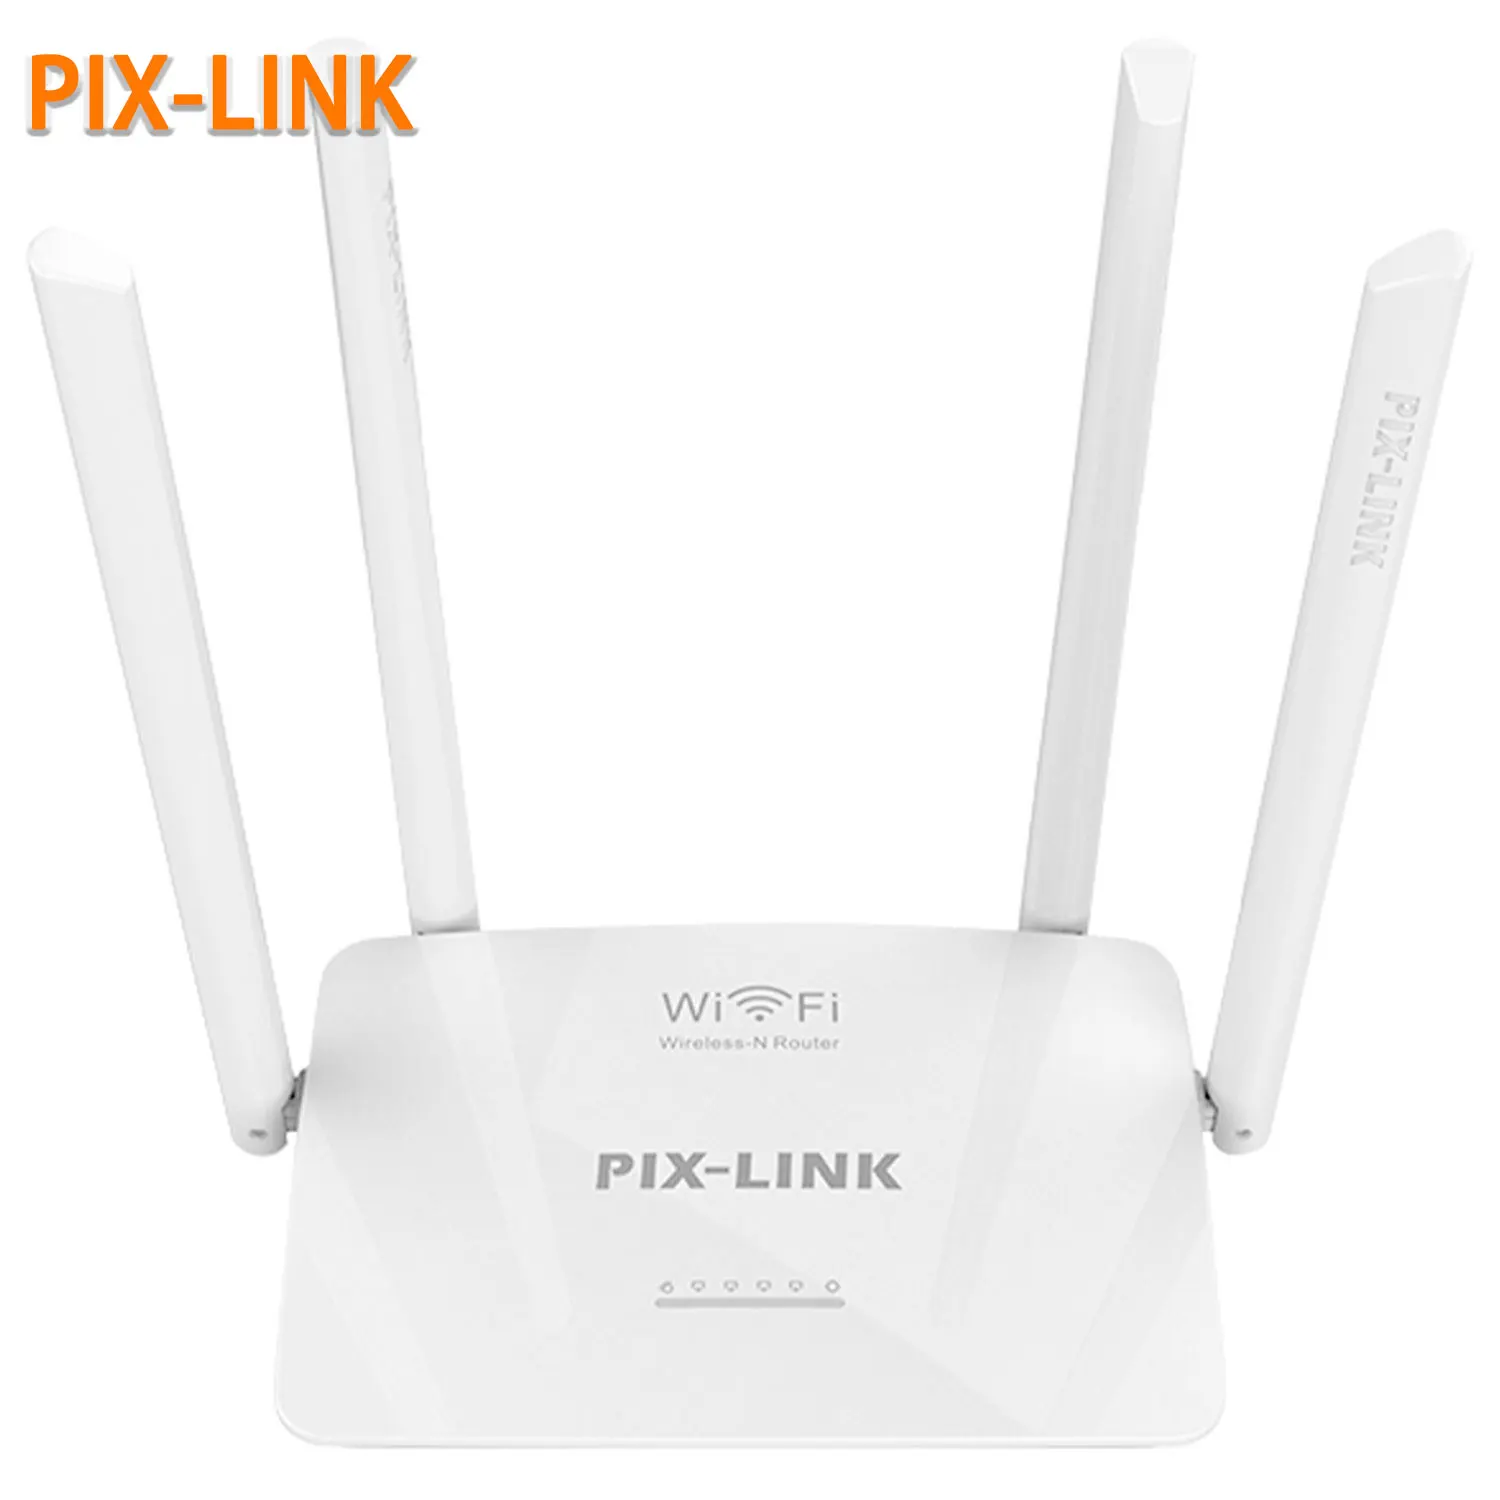 

Adsl-2 Modem Wifi-Router Router-Broadband 300mbps Pixlink D305 Stable Wireless Wireless